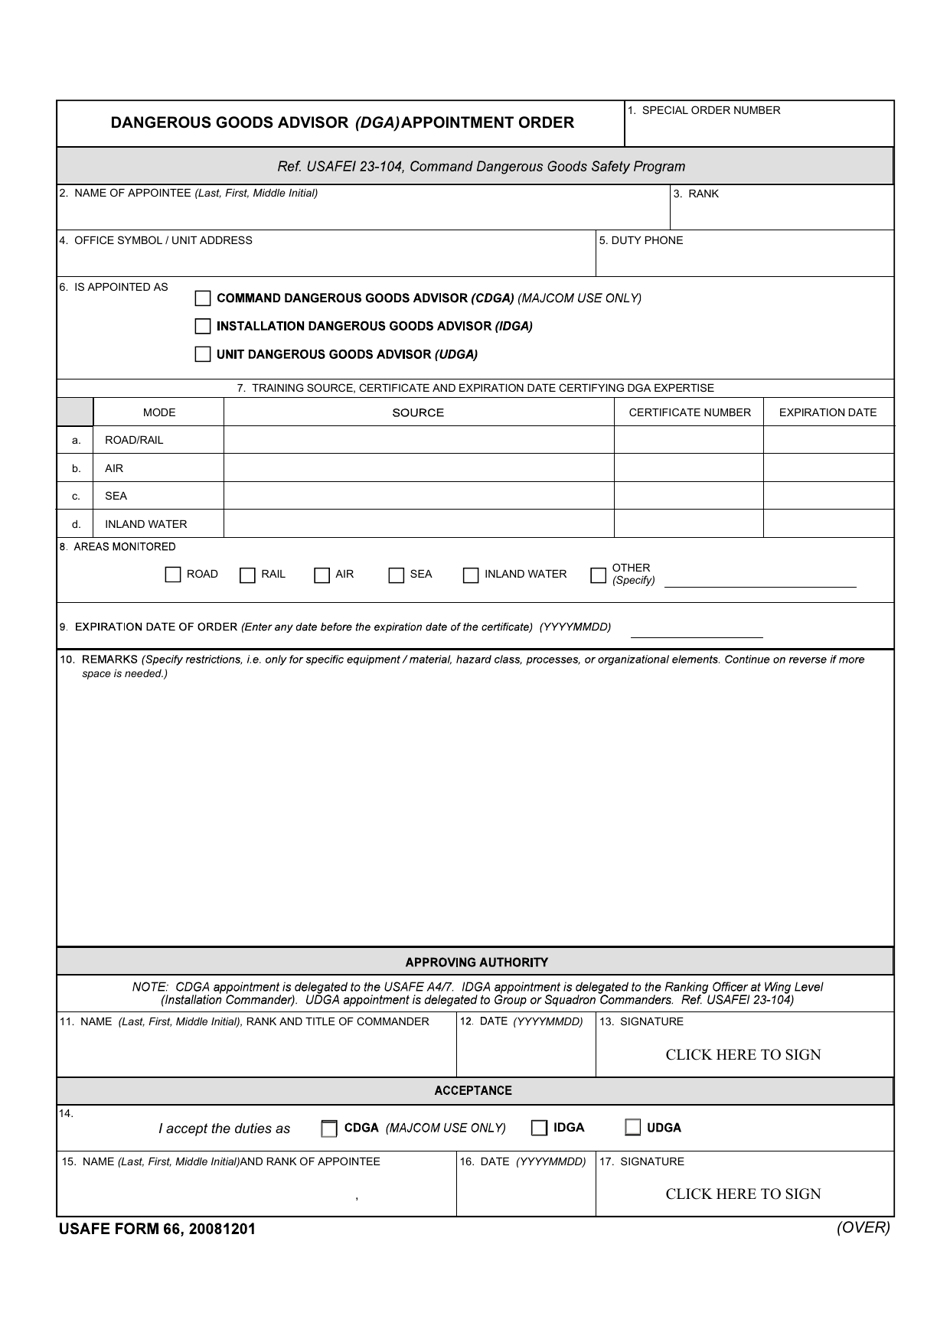 USAFE Form 66 Dangerous Goods Advisor (Dga) Appointment Order, Page 1